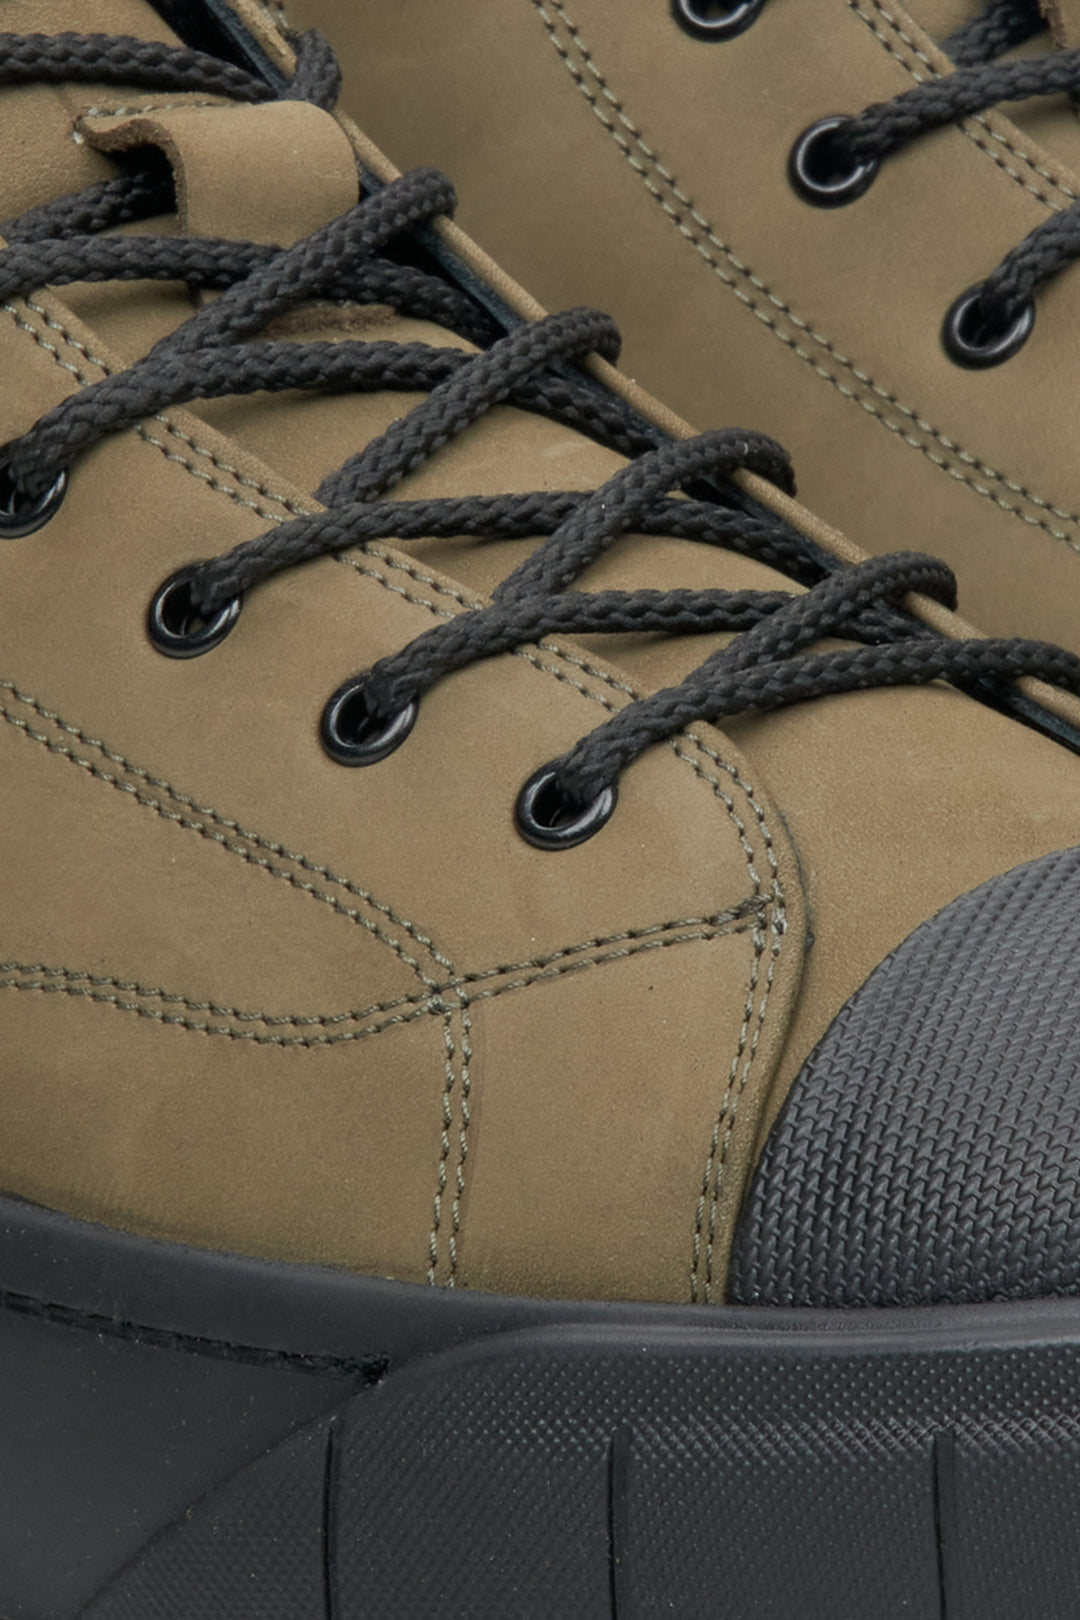 Estro's dark green high-top men's winter sneakers made of nubuck - close-up on the lacing system.